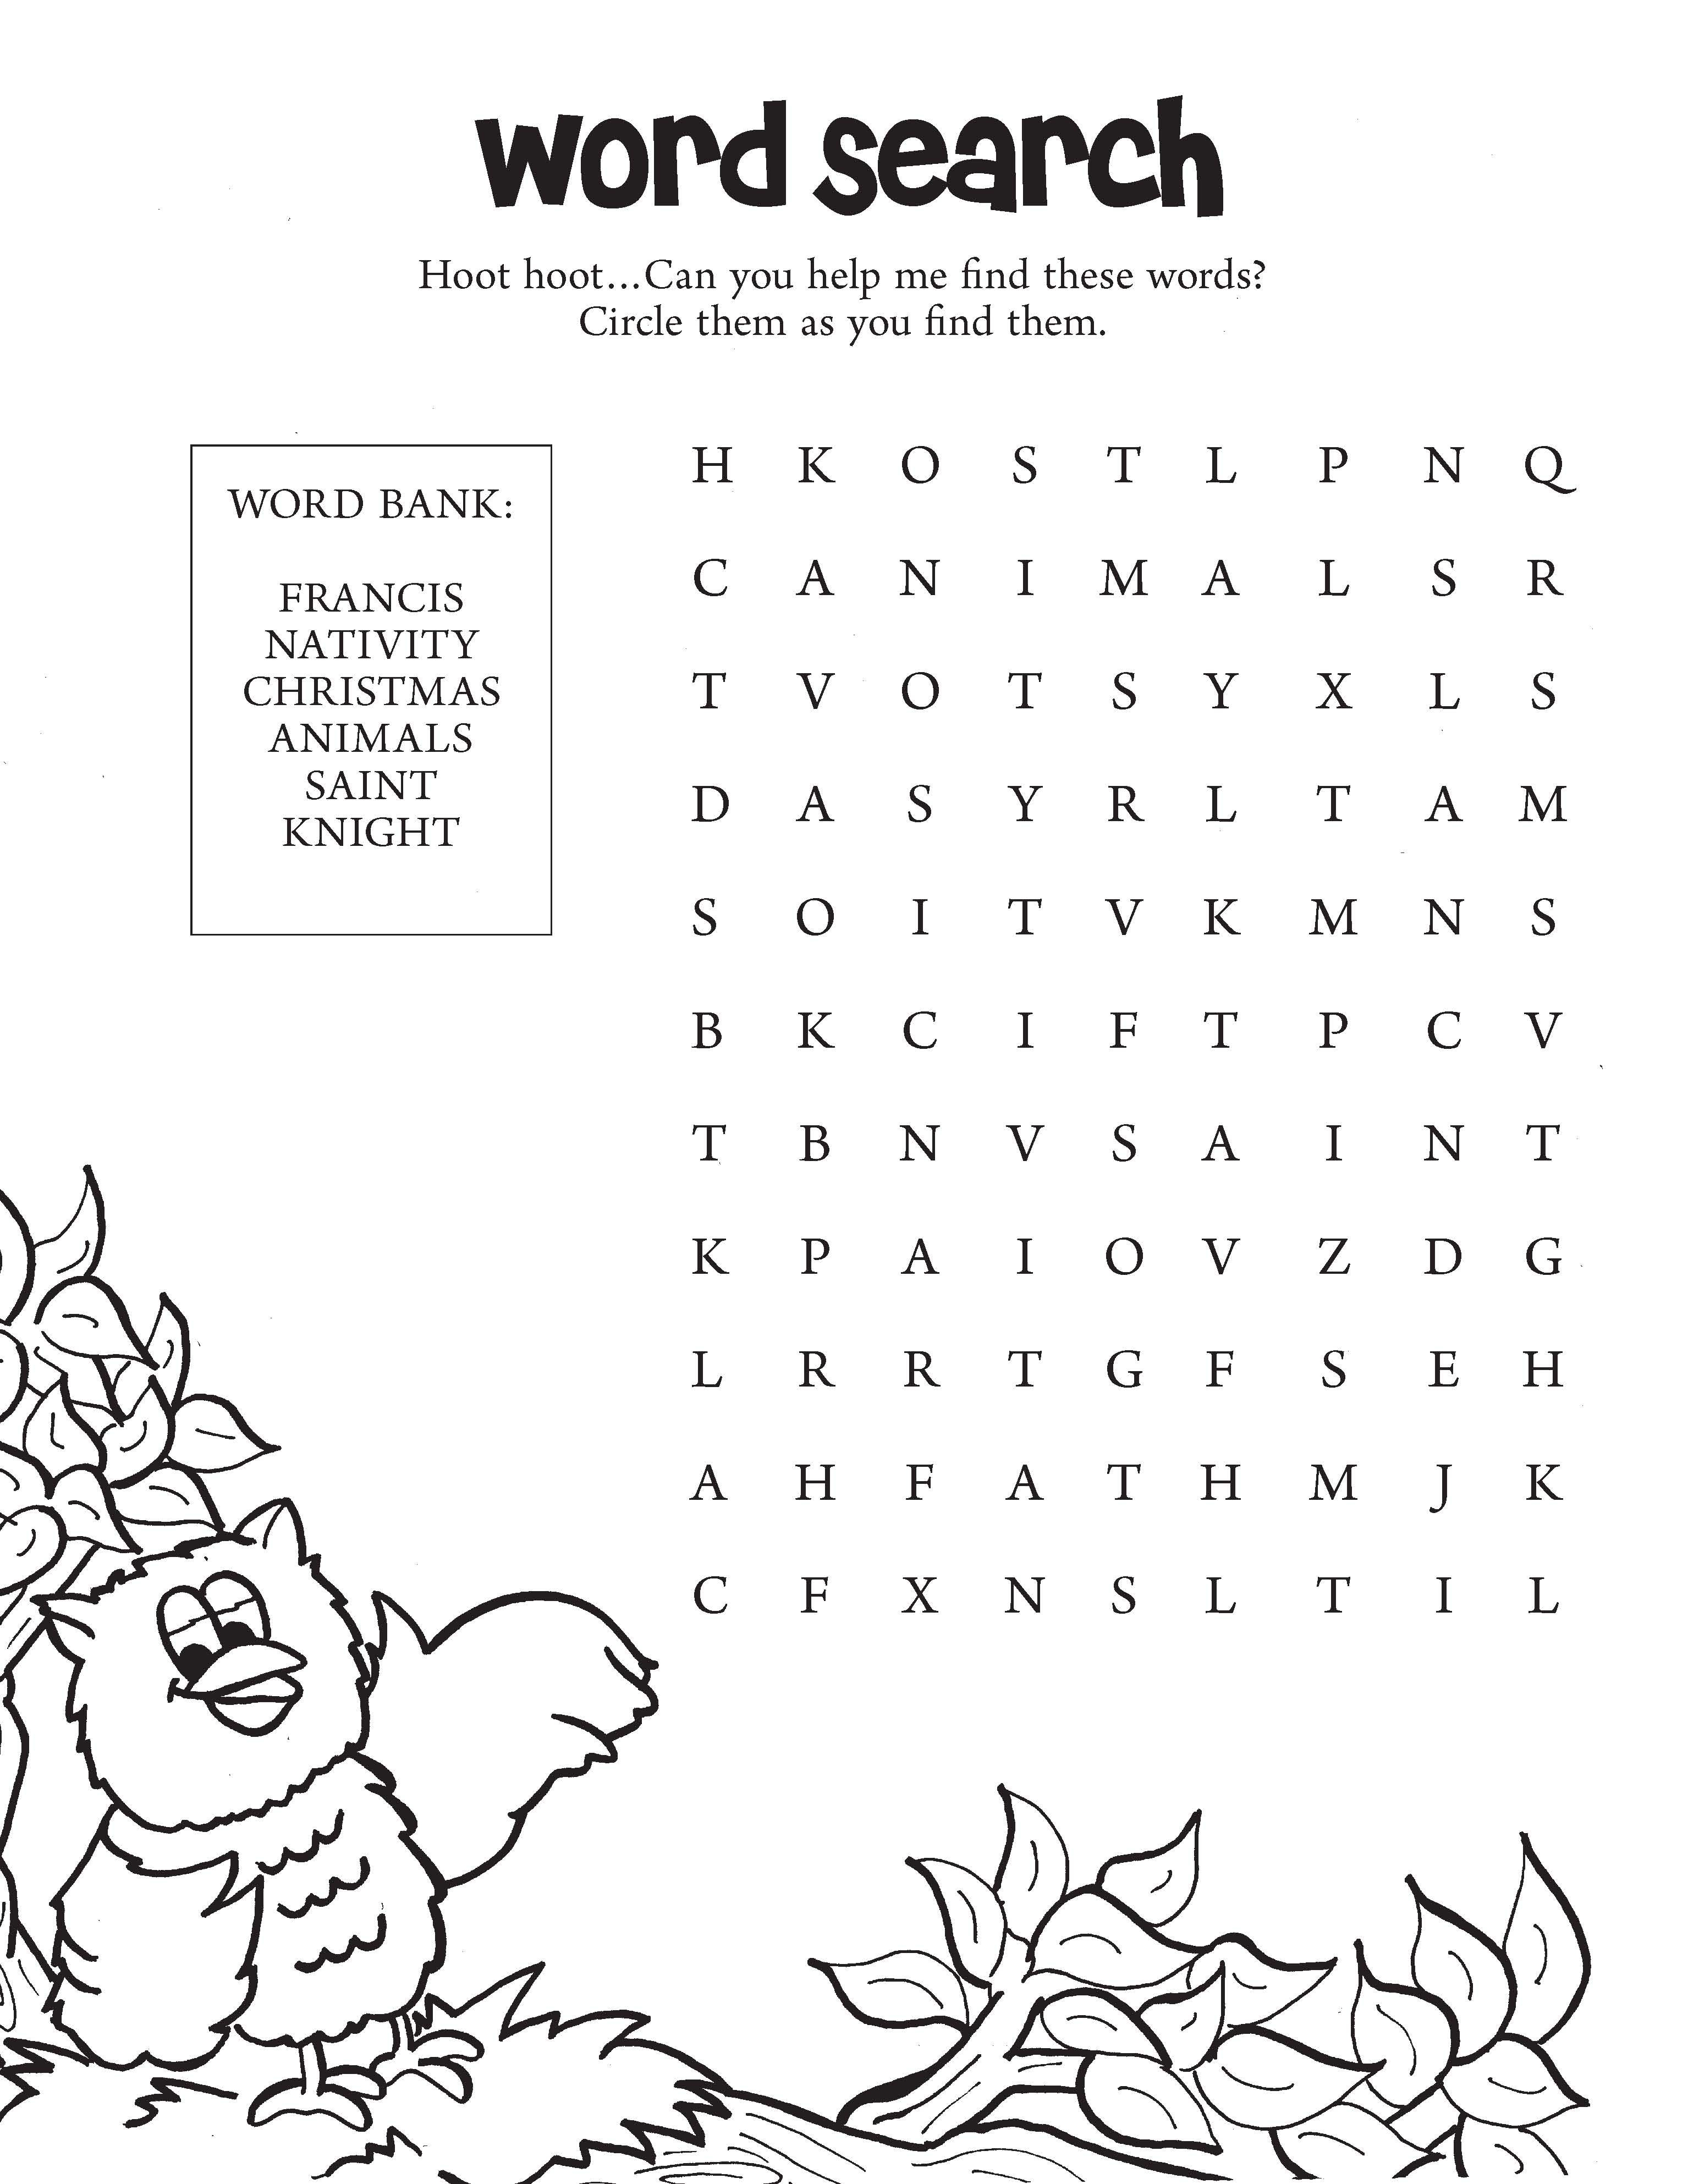 Download This Great Advent Word Search For Your Family Or Your Class - Free Printable Catholic Word Search